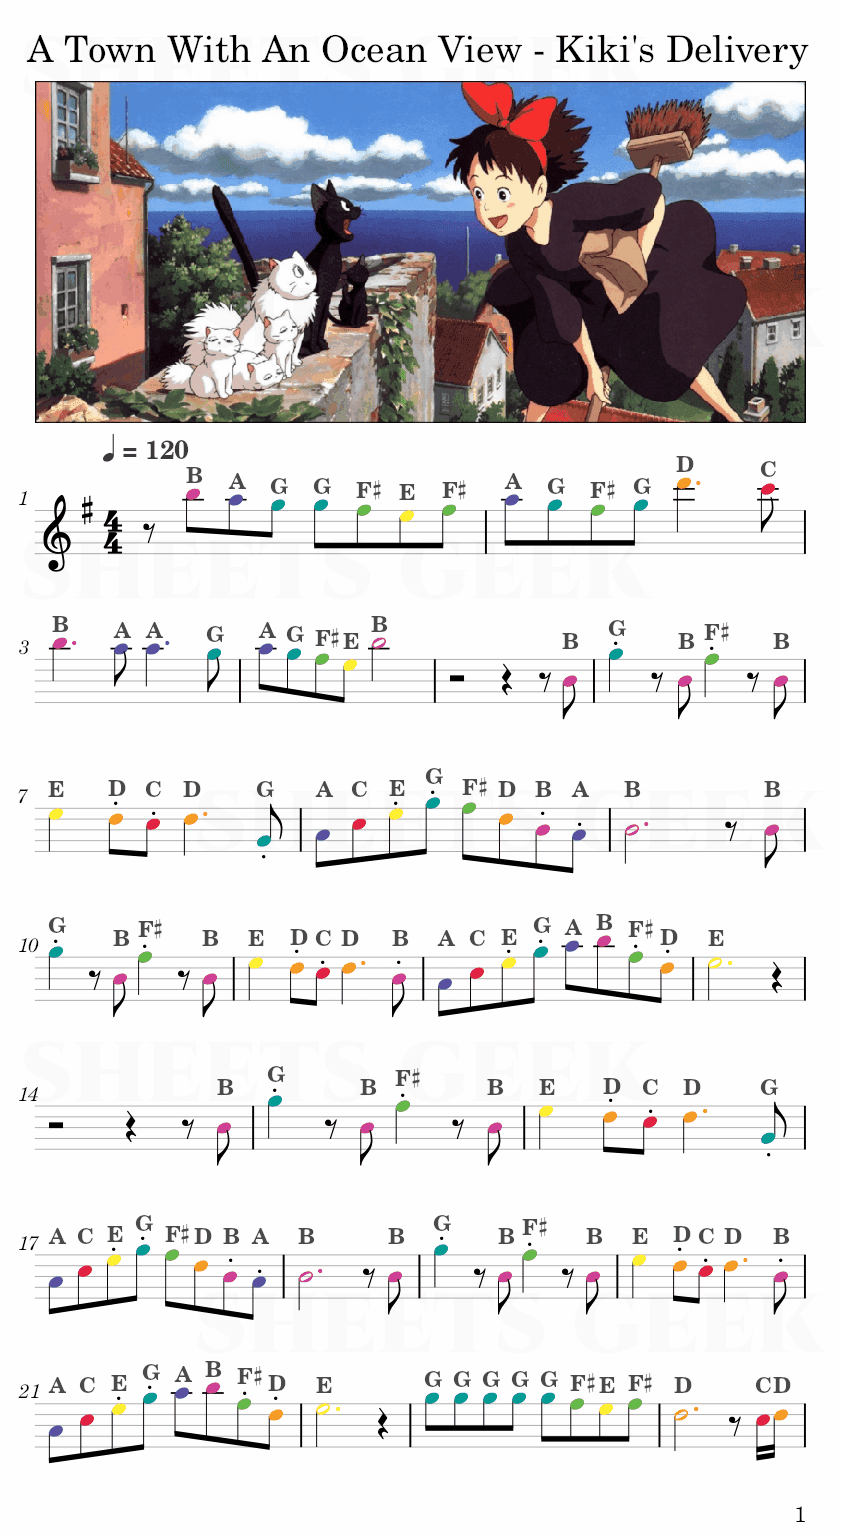 A Town With An Ocean View - Kiki's Delivery Service Main Theme (Umi no Mieru Machi) Easy Sheet Music Free for piano, keyboard, flute, violin, sax, cello page 1